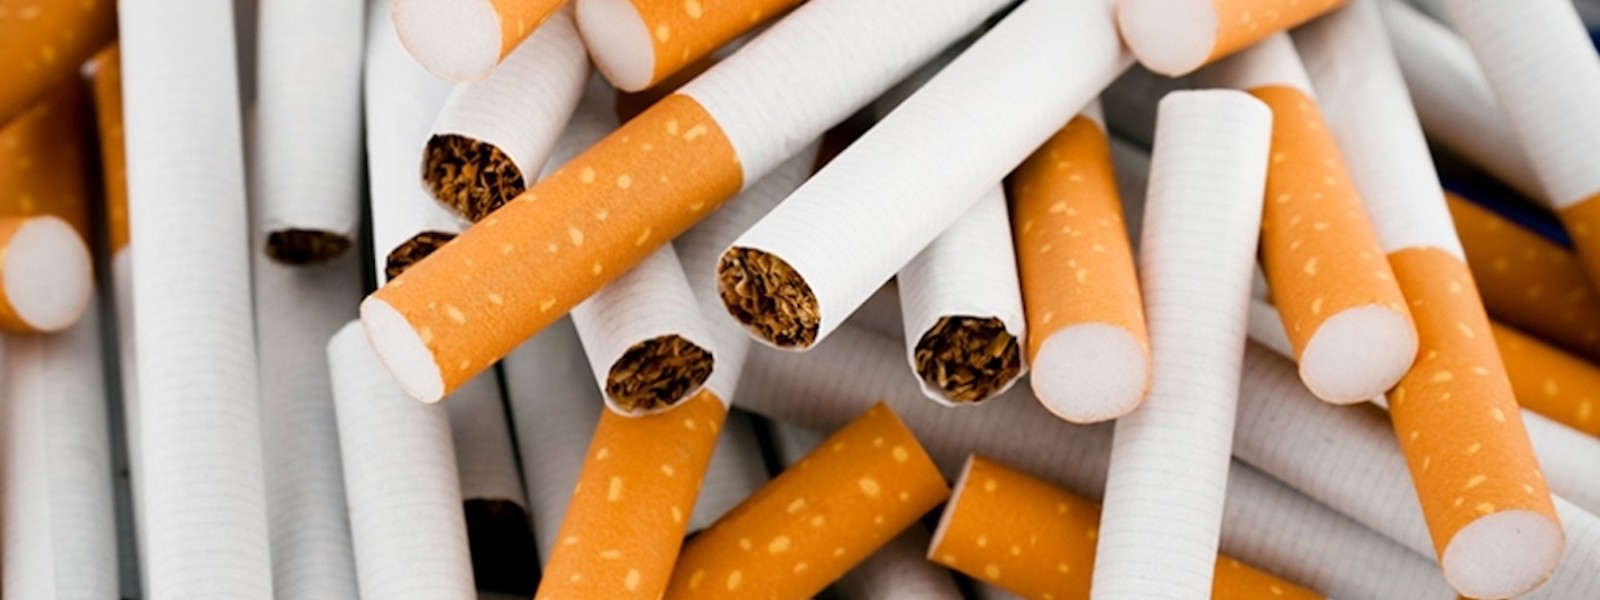 Budget 2022: Cigarette price to increase by Rs.5, Excise Tax also to go up